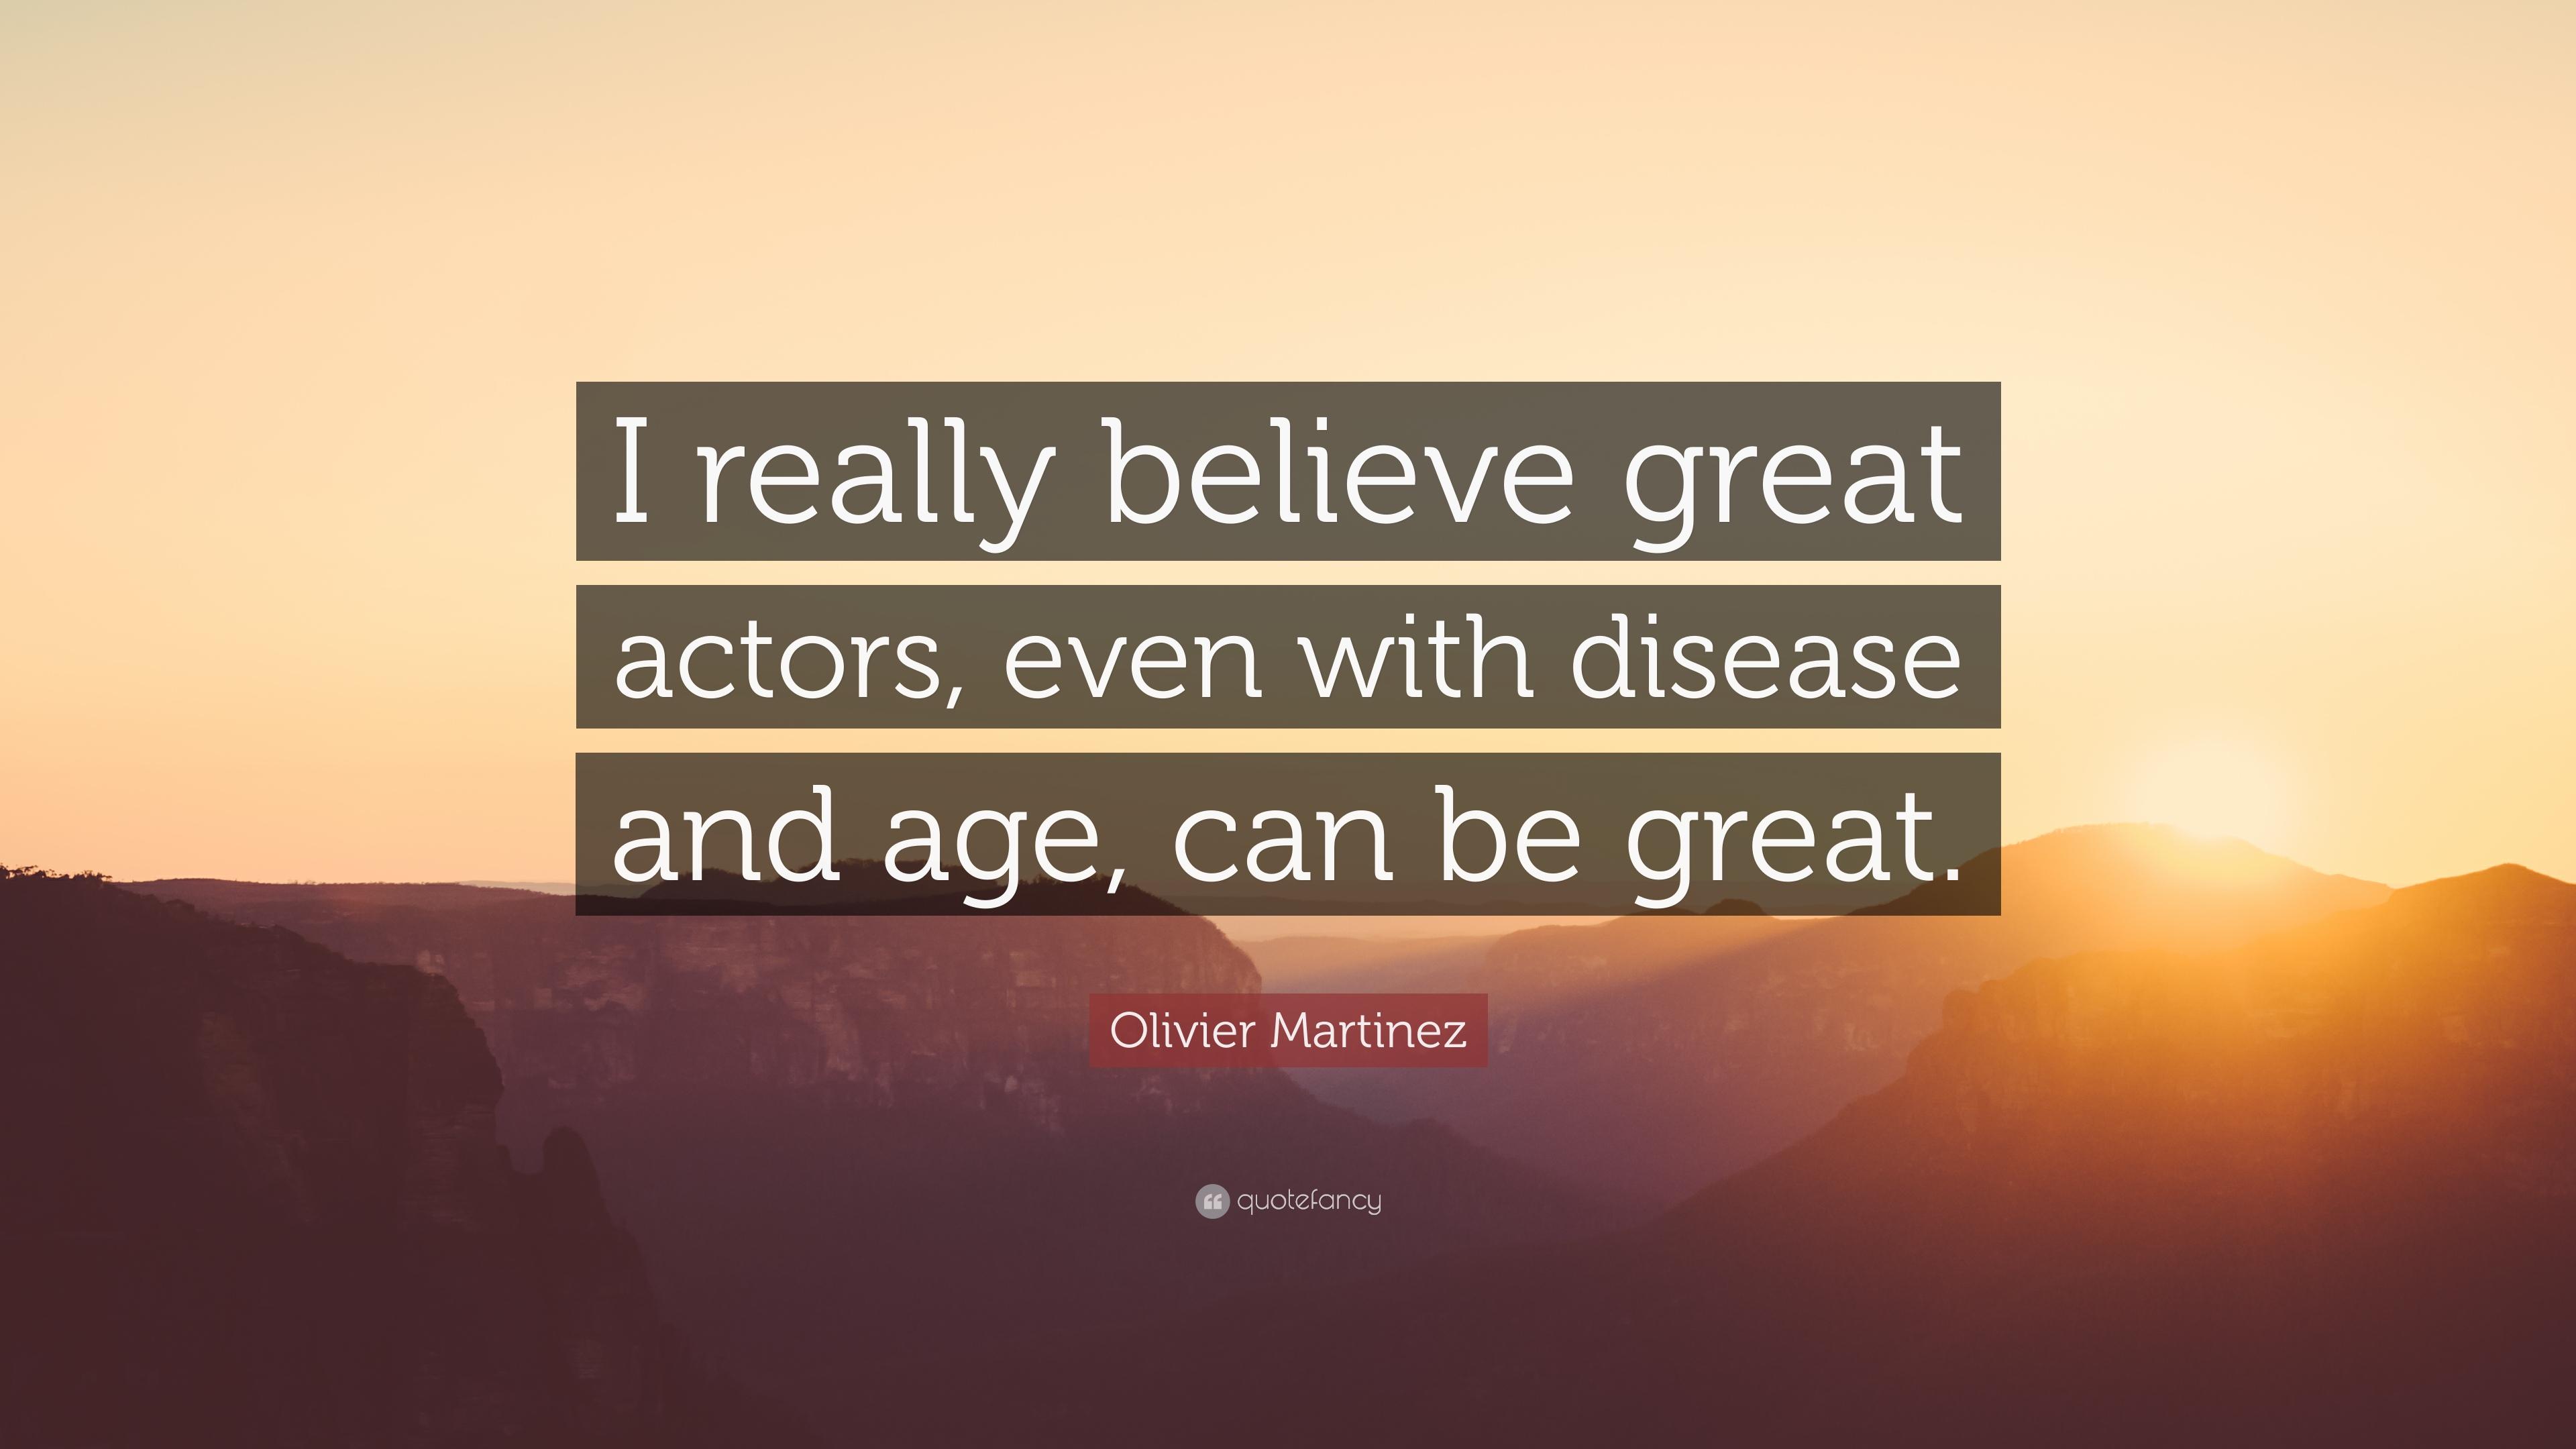 Olivier Martinez Quote: “I really believe great actors, even